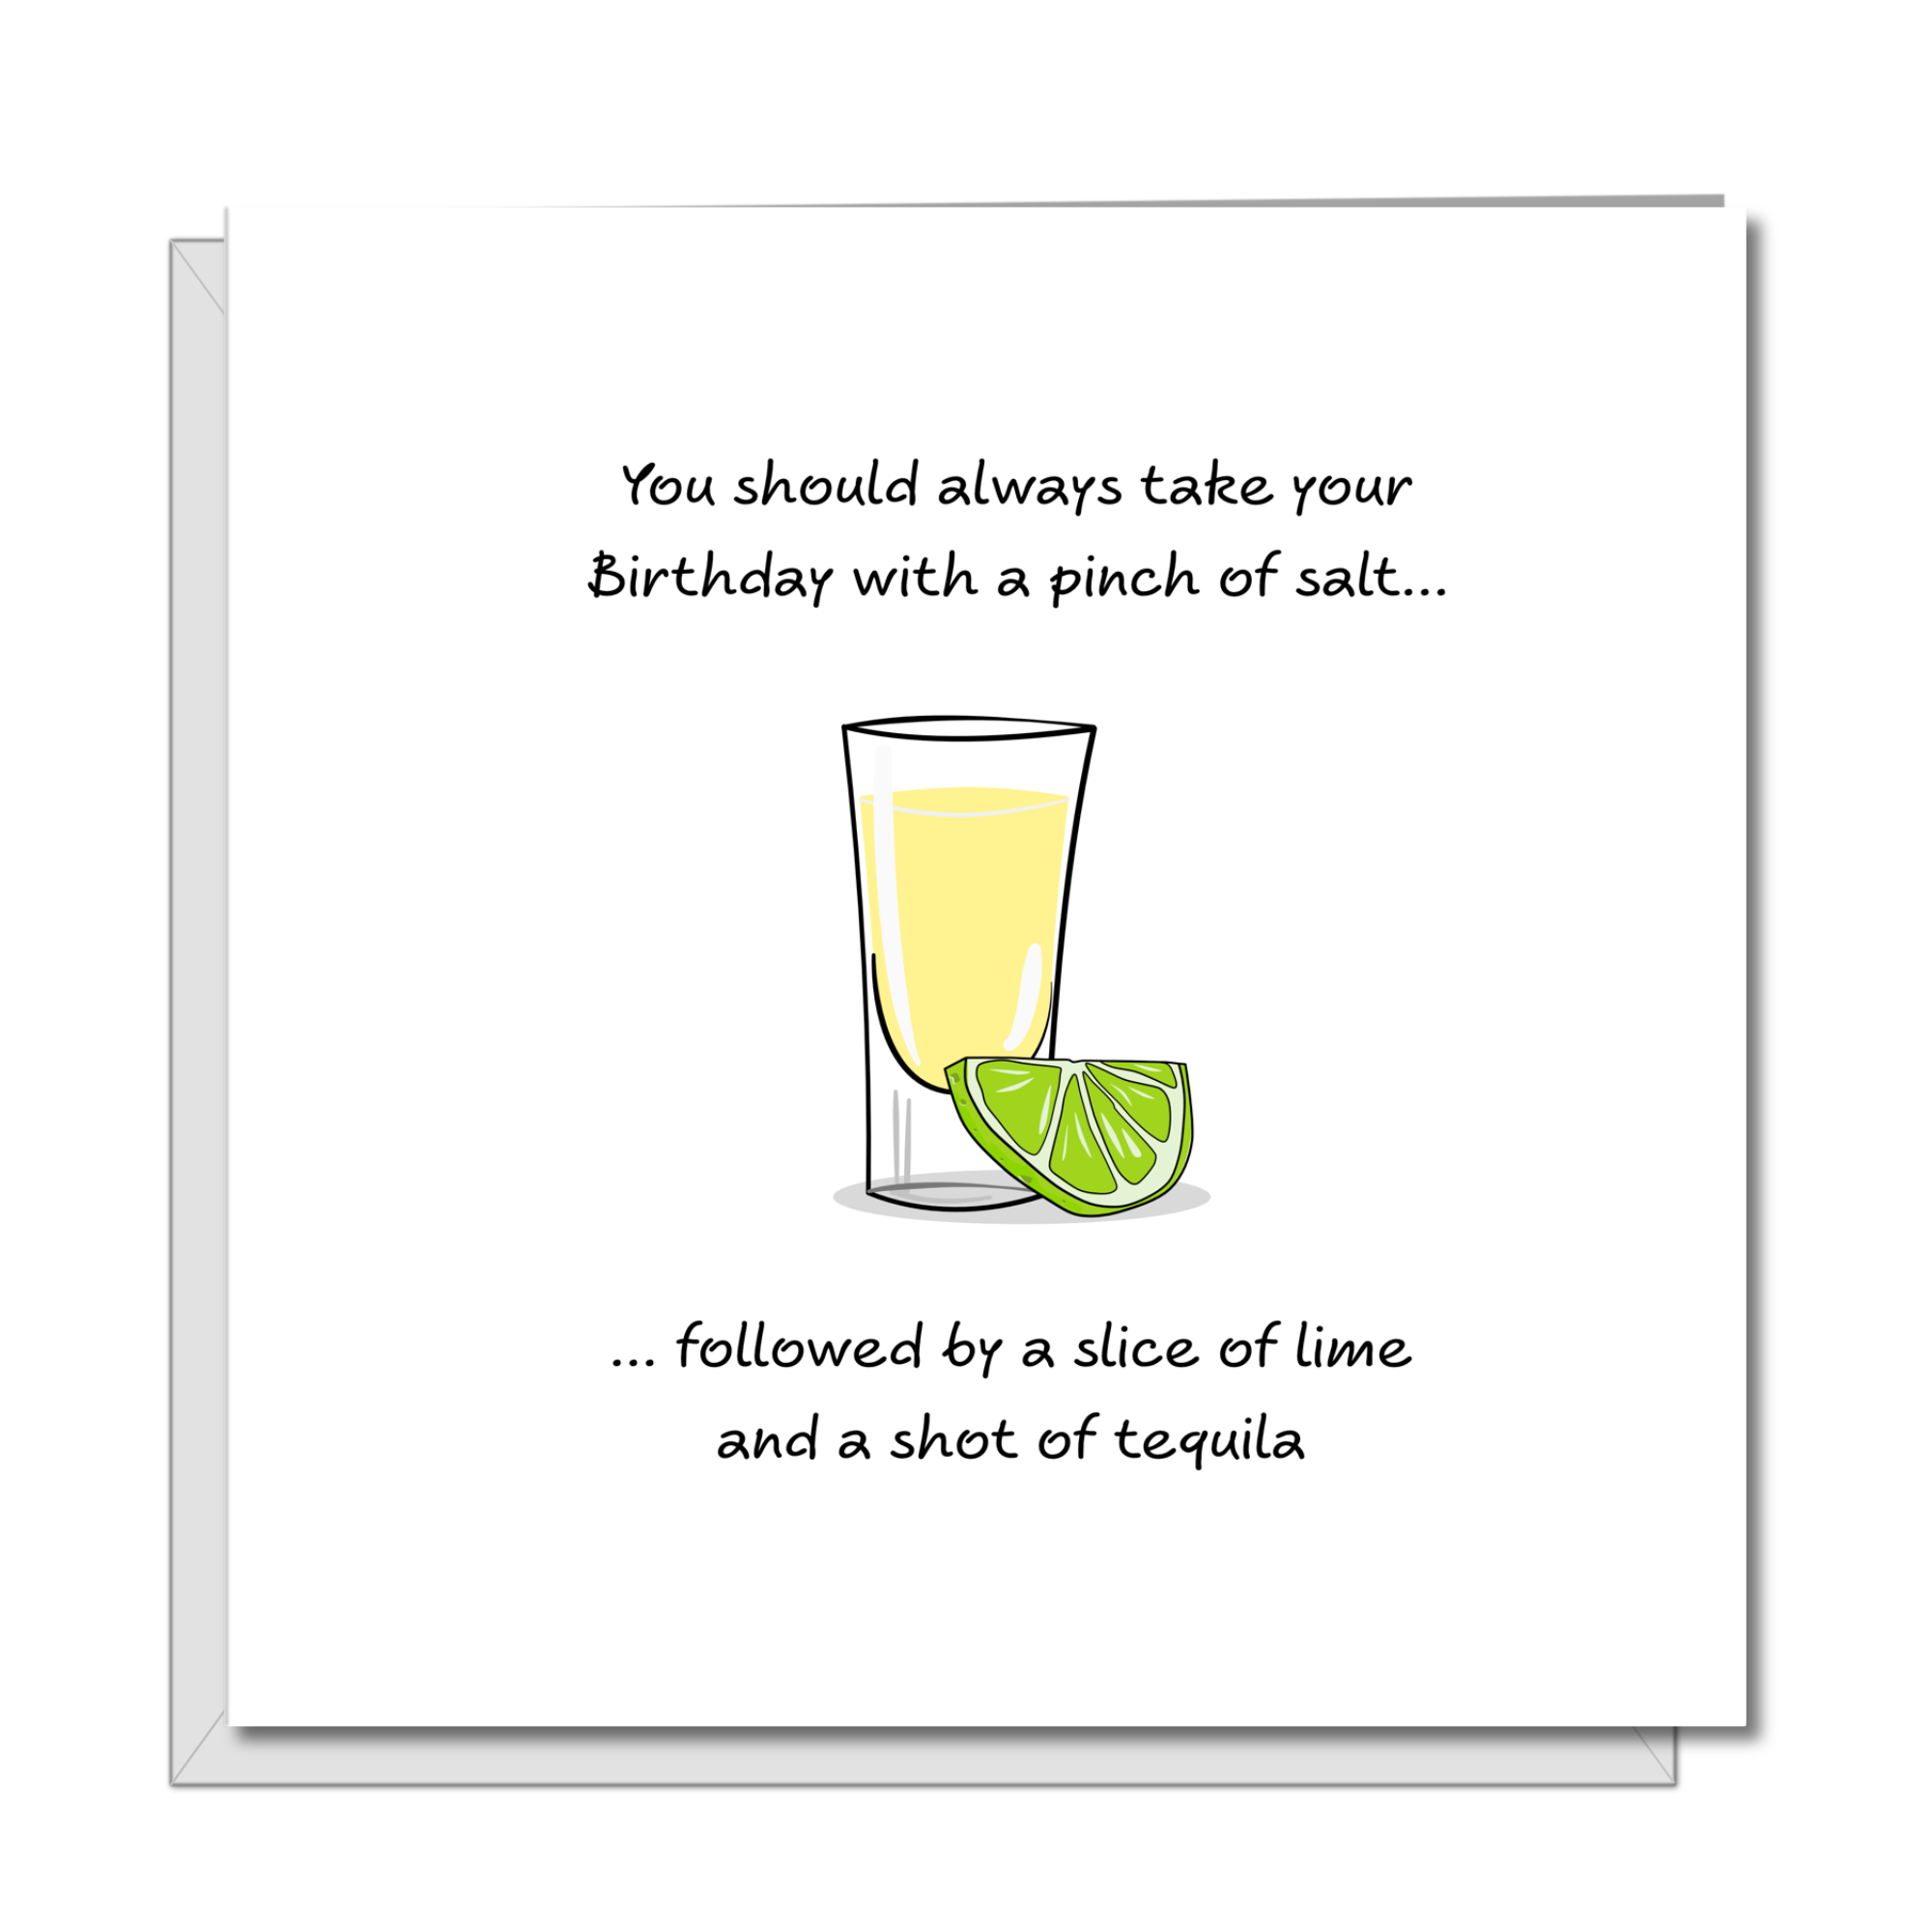 Tequila Birthday card 18th 21st 30th 40th 50th friend friendships. Funny, humorous amusing and fun card. Alcohol lime salt. Handmade